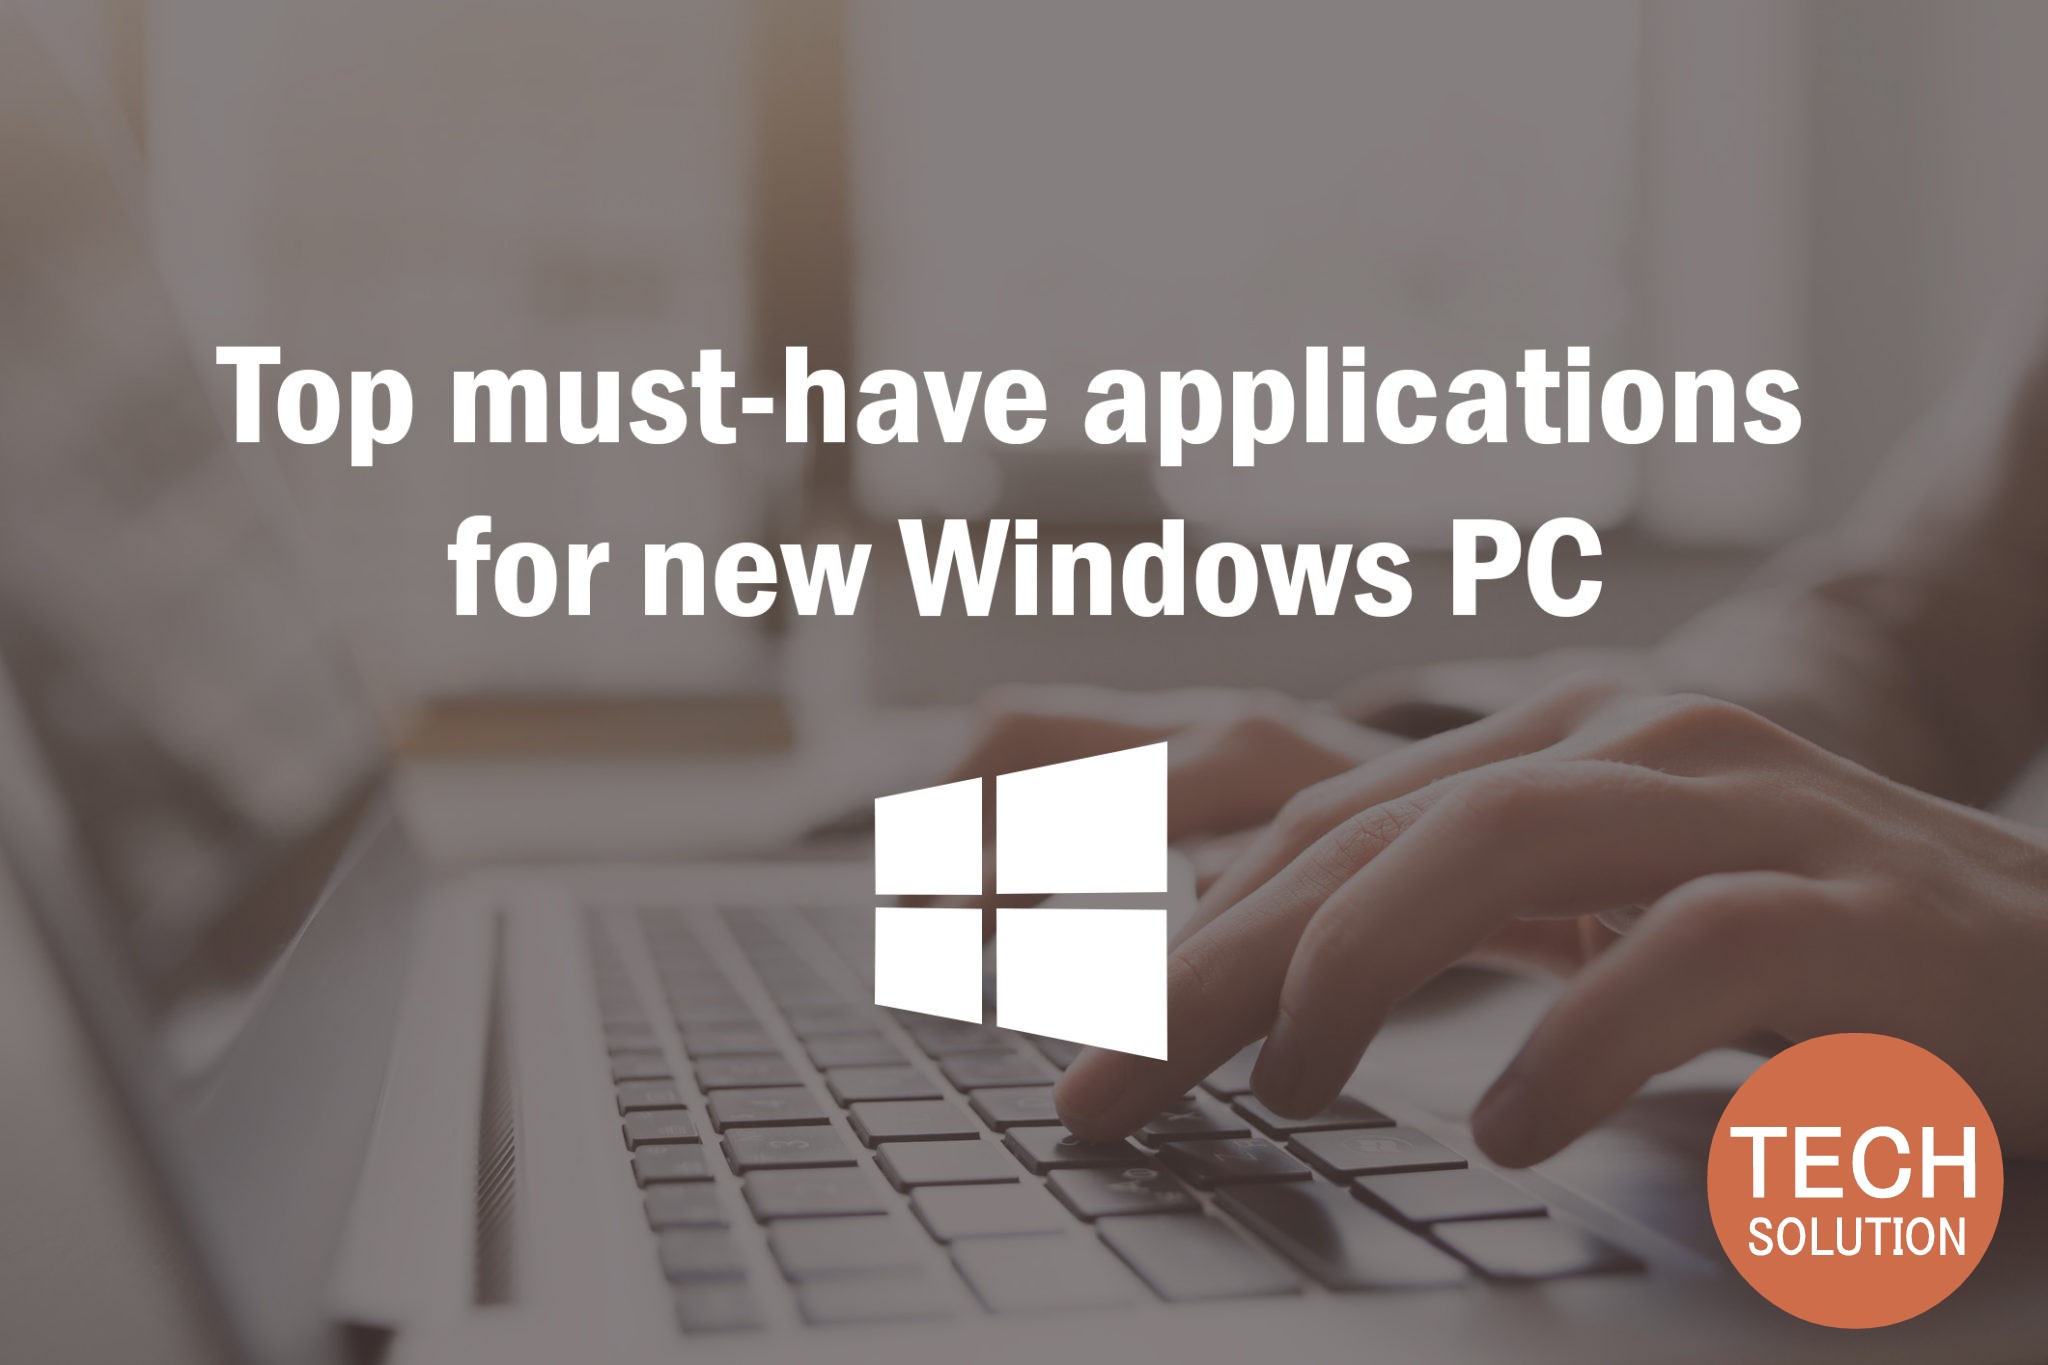 Top-must-have-applications-for-new-Windows-PC-Part-1-2048x1365